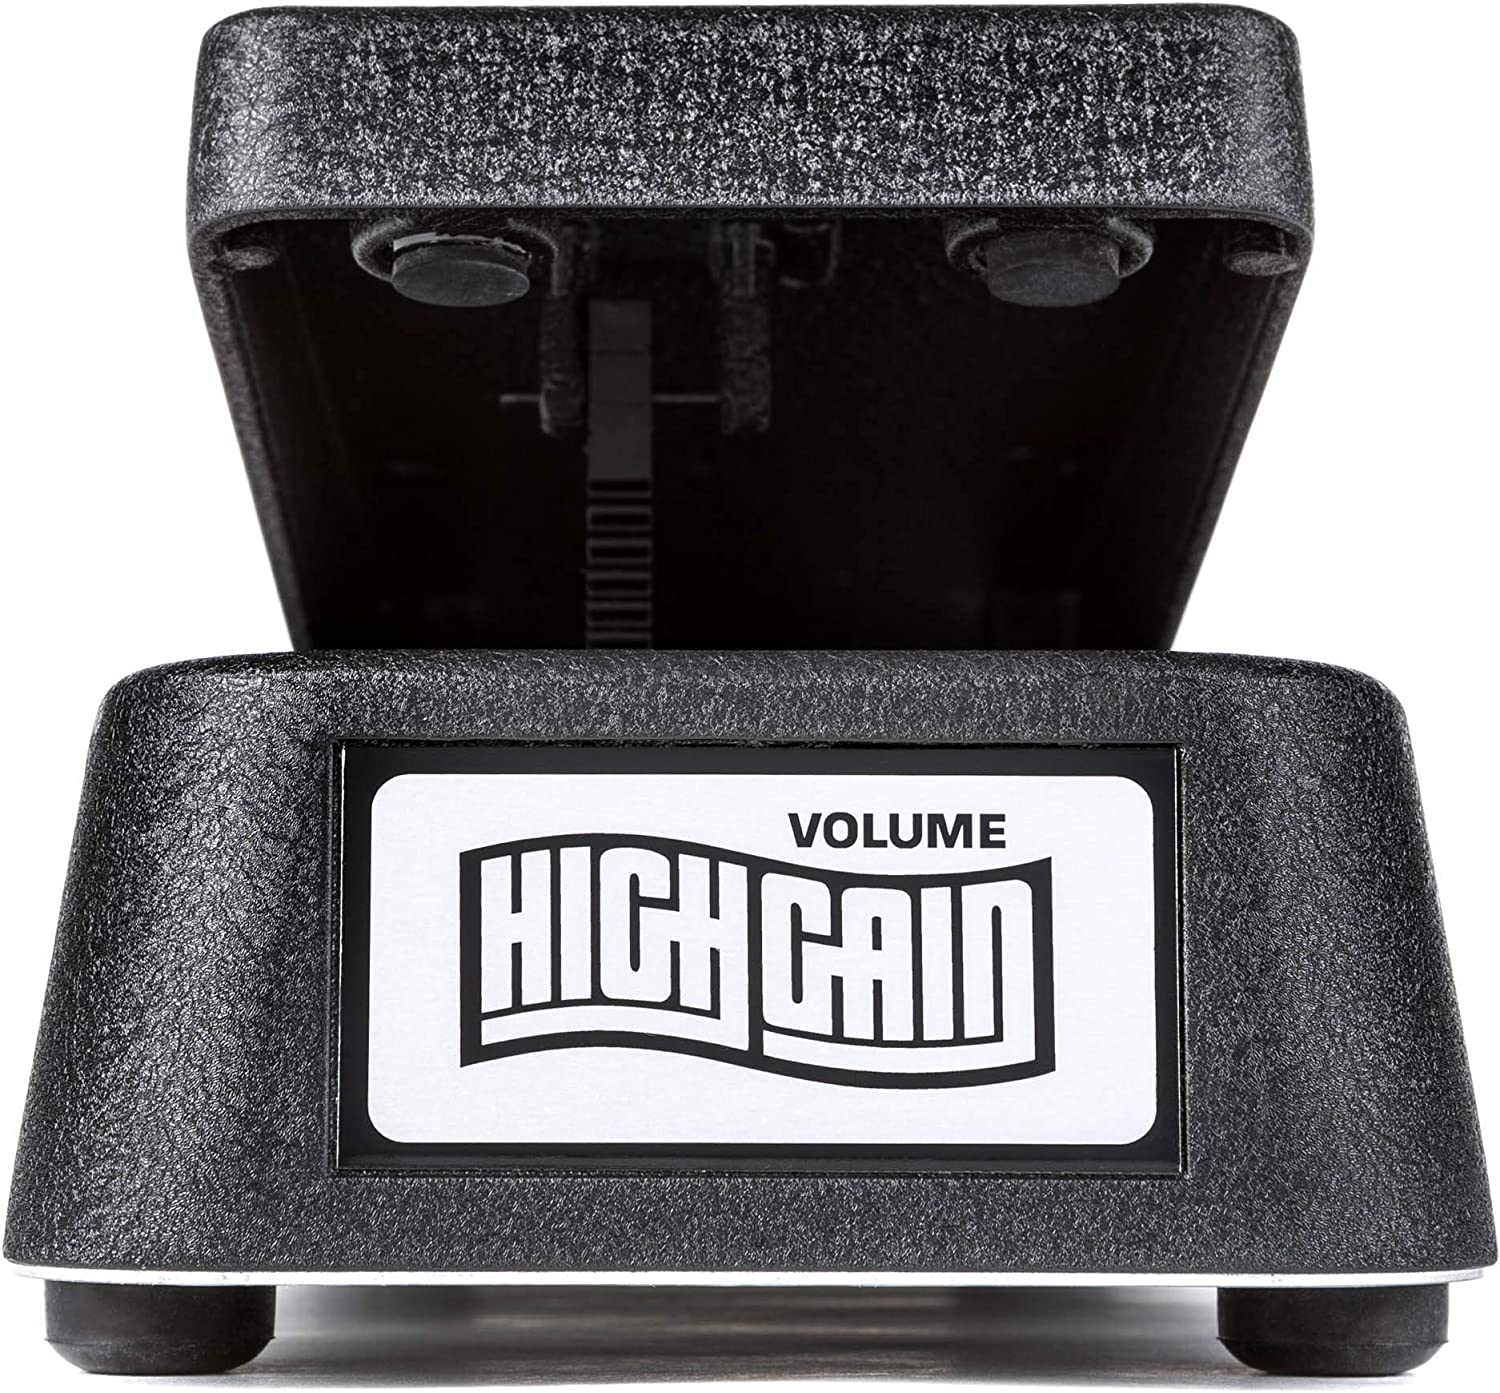 Dunlop High Gain Volume Pedal on a white background